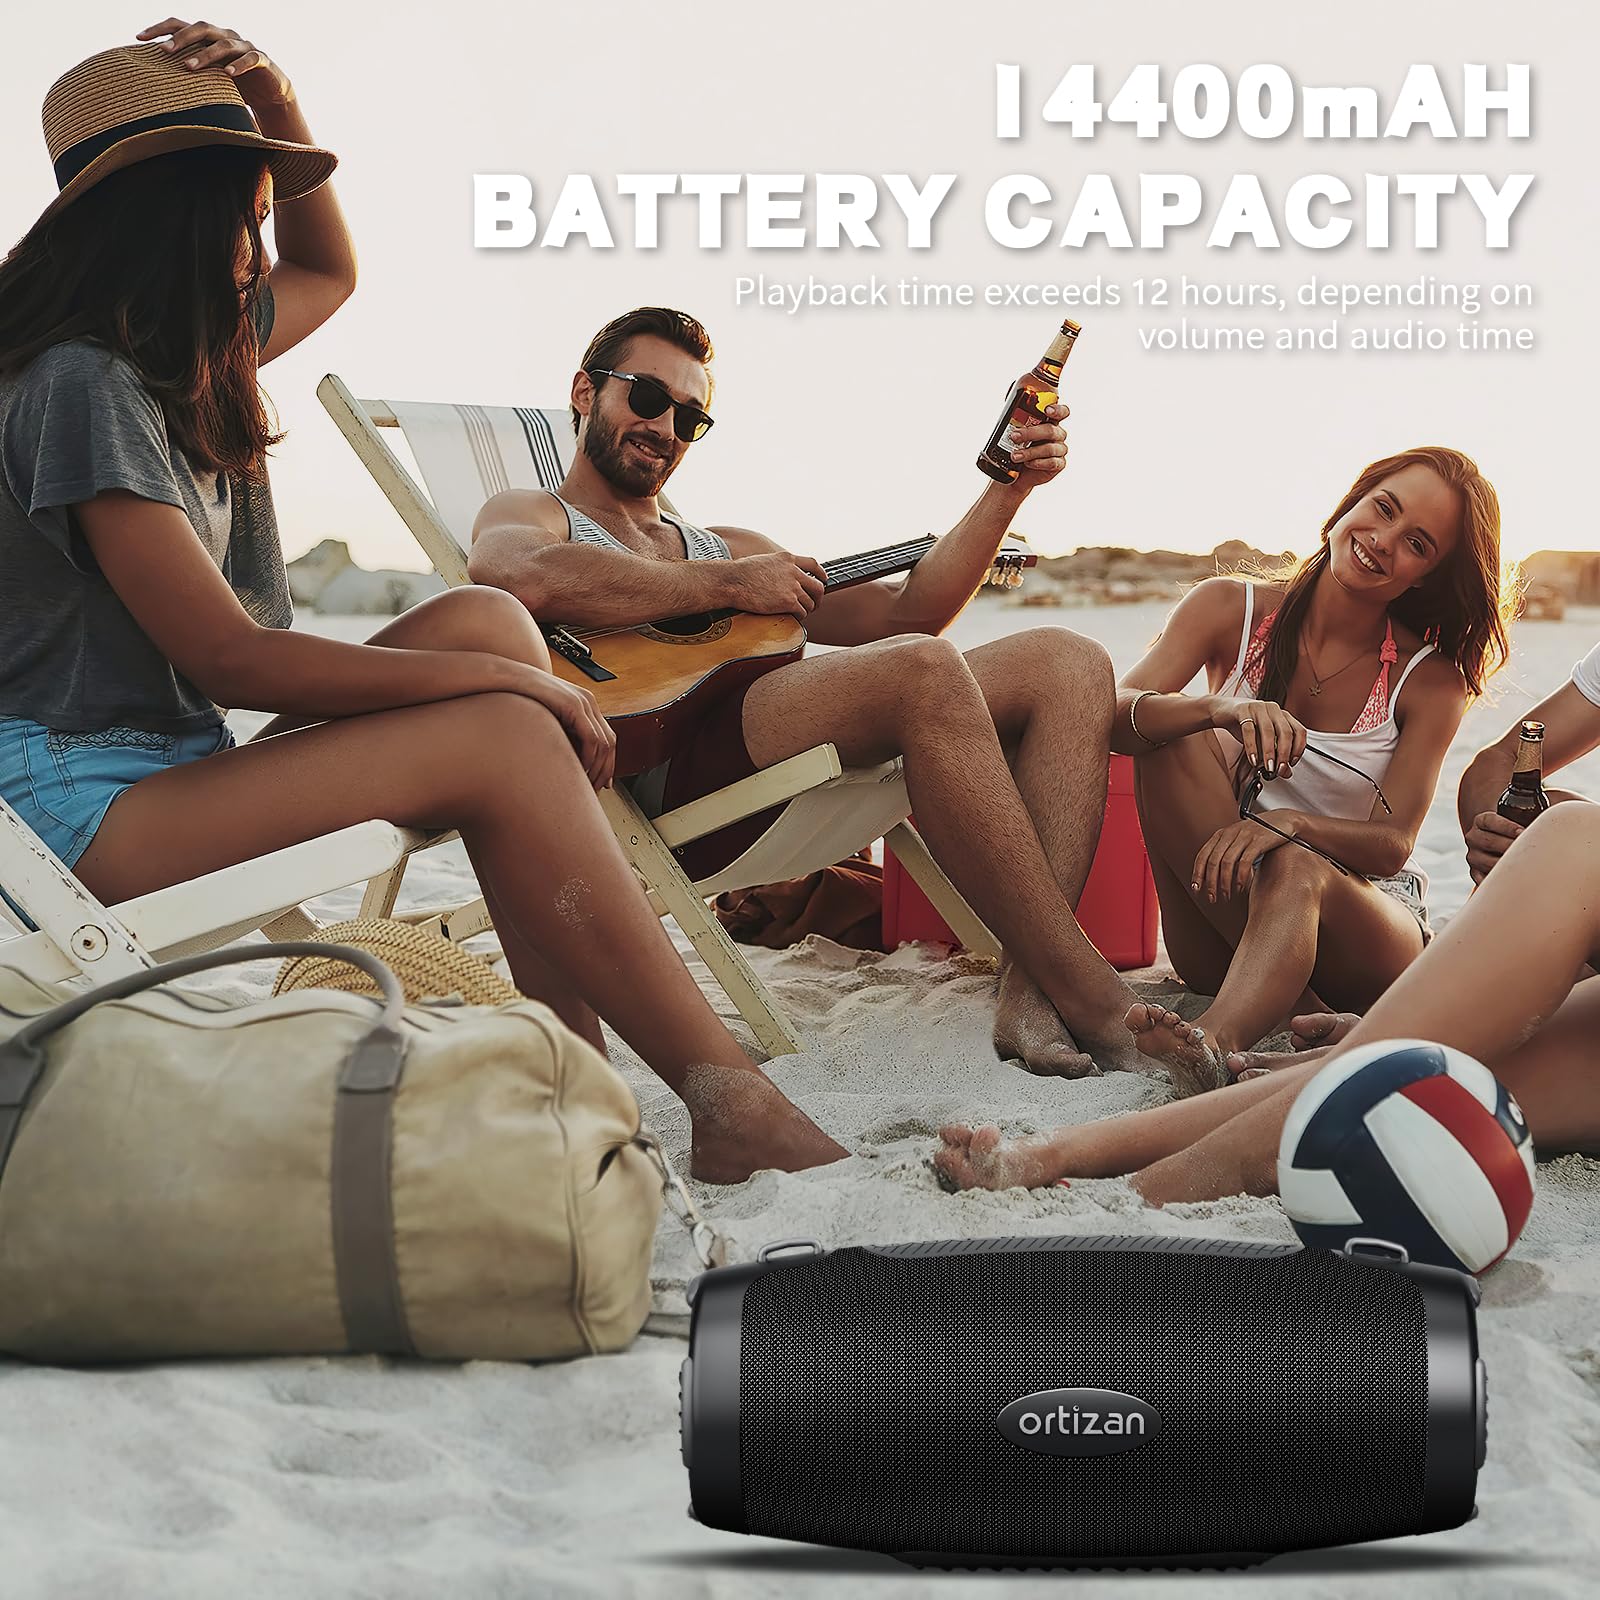 Ortizan 80W Bluetooth Speaker - Powerful Sound and Deep Bass, Portable Wireless, IPX7 Waterproof, 12H Playtime, Power Bank, EQ, USB, LED Lights - Outdoor Loud Subwoofer Boombox for Party, Camping